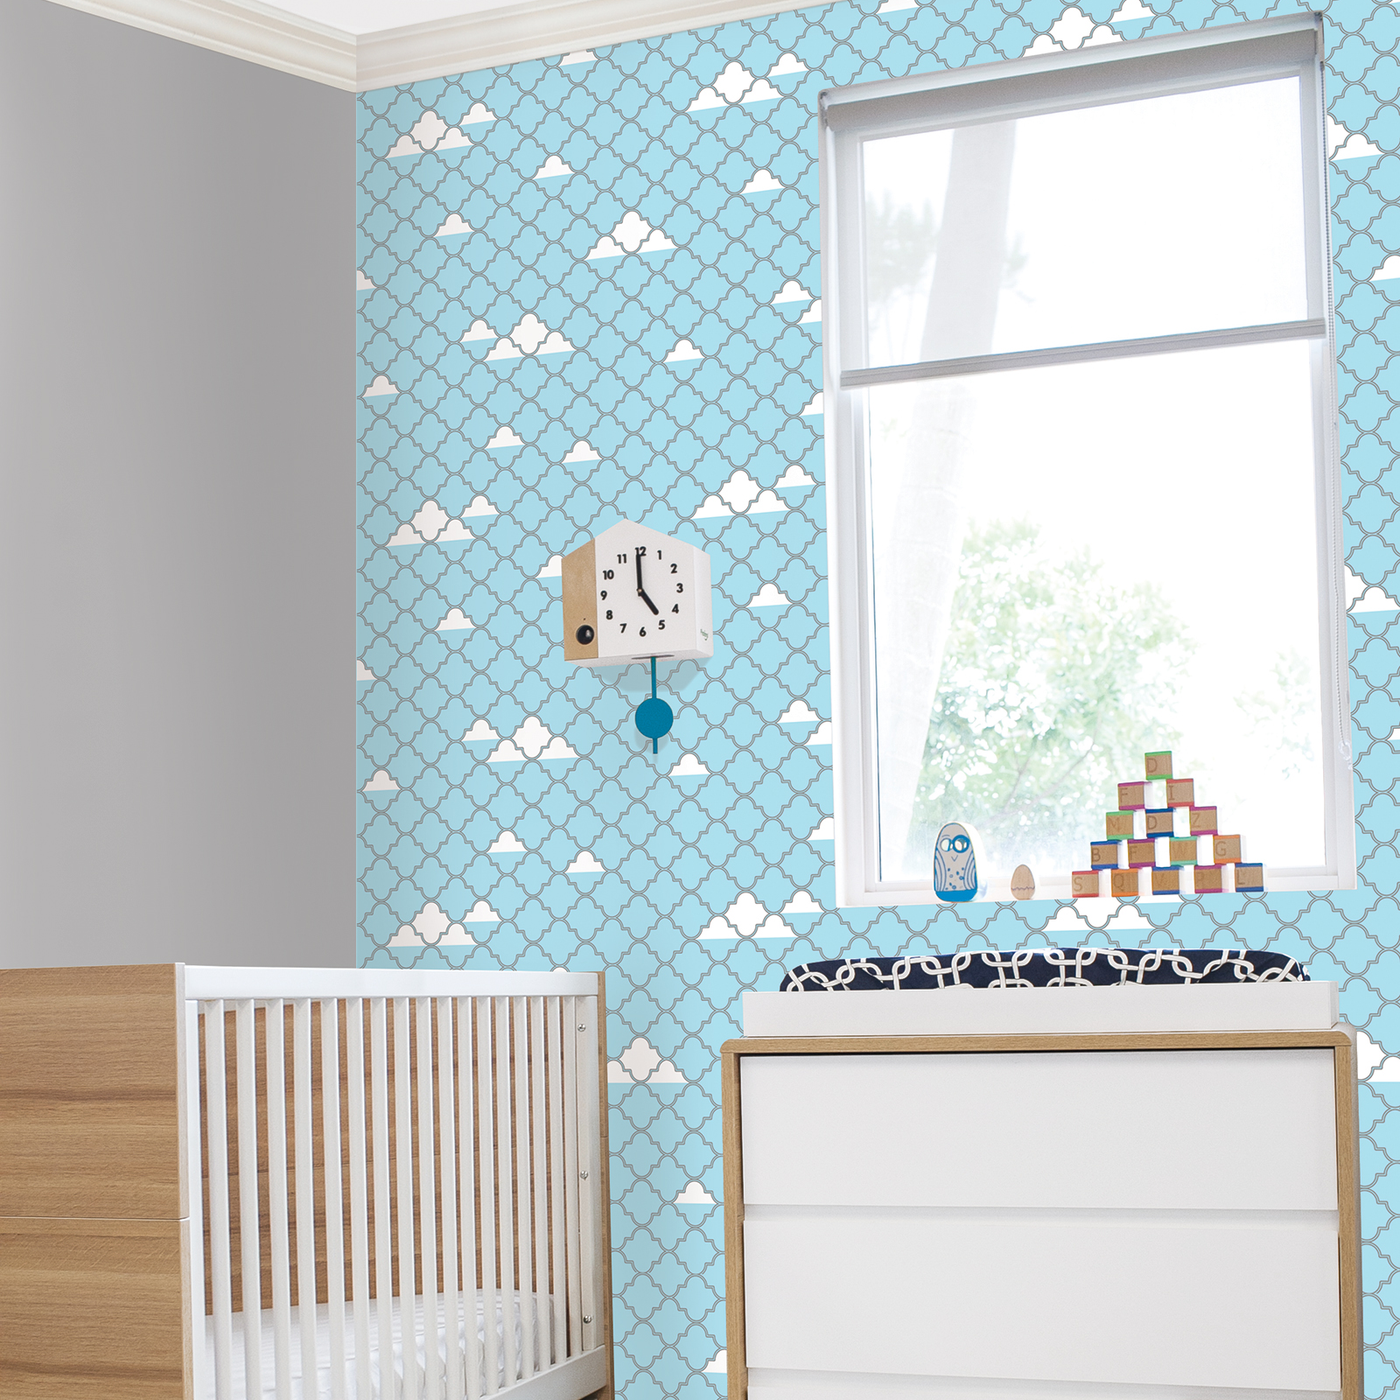 Tempaper's Clouds Peel And Stick Wall Mural shown in a kids bedroom.